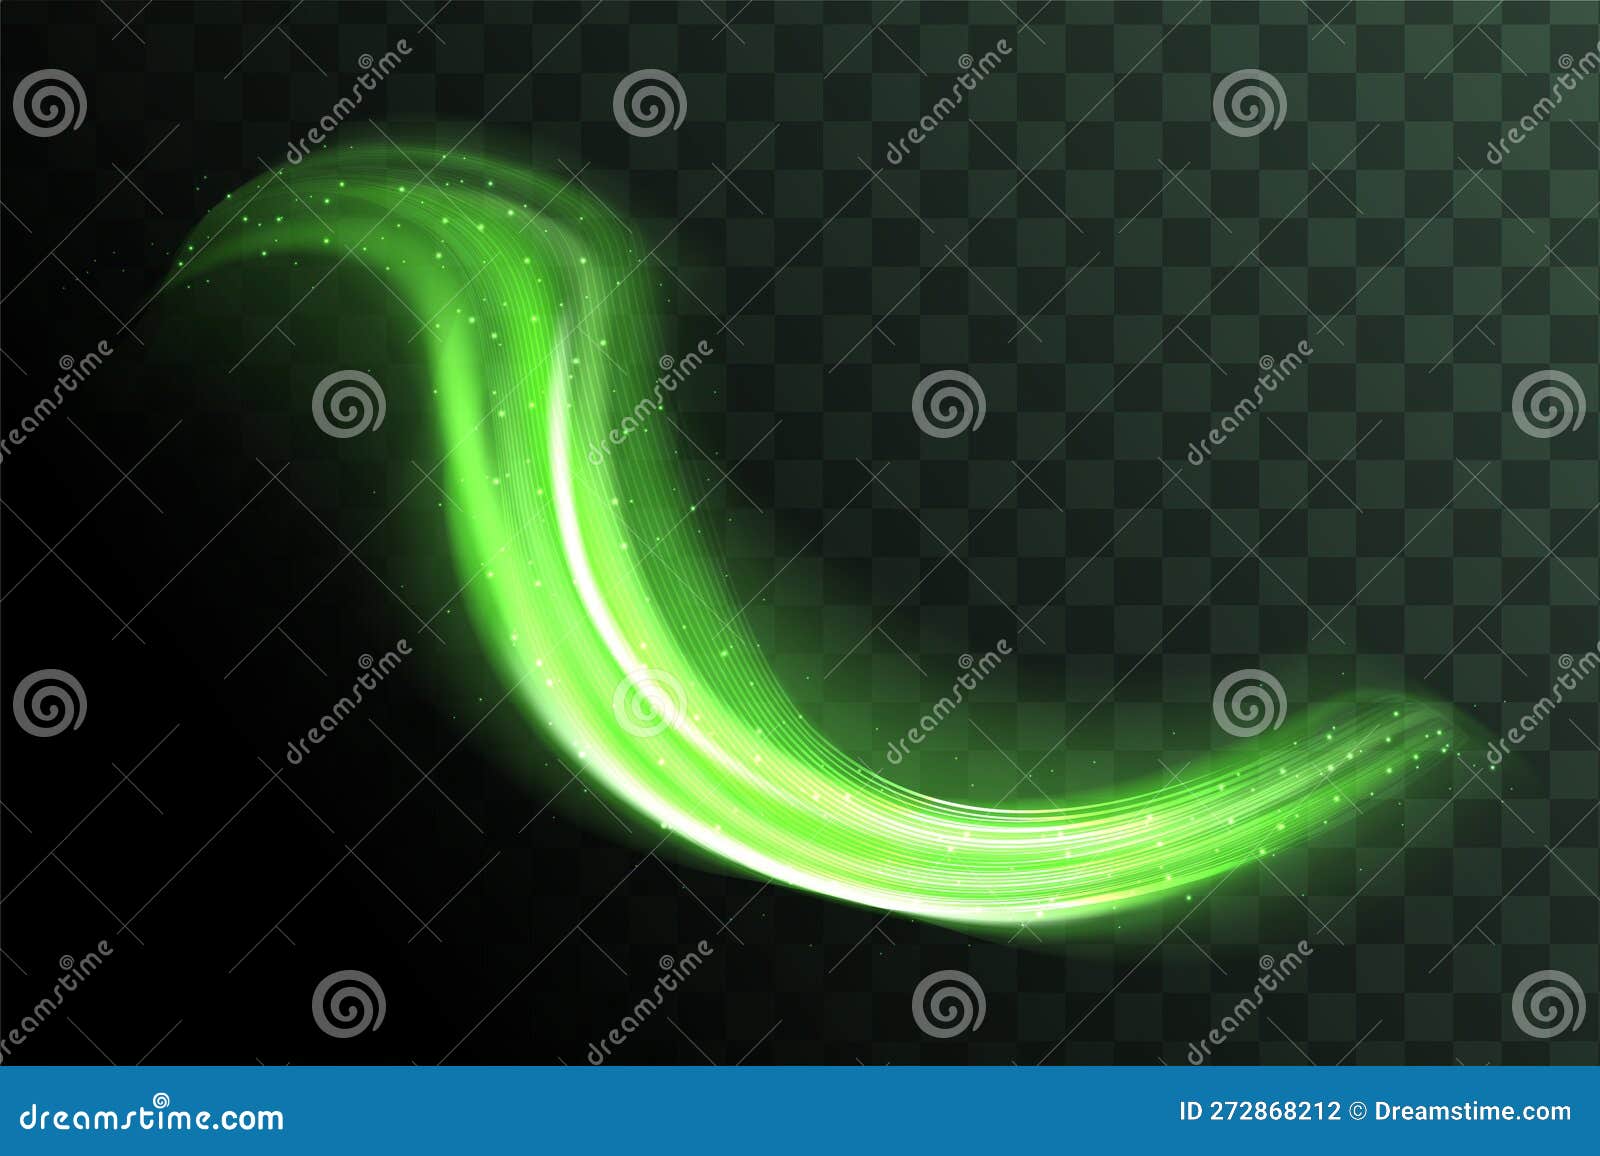 Curve light effect stock vector. Illustration of vector - 272868212